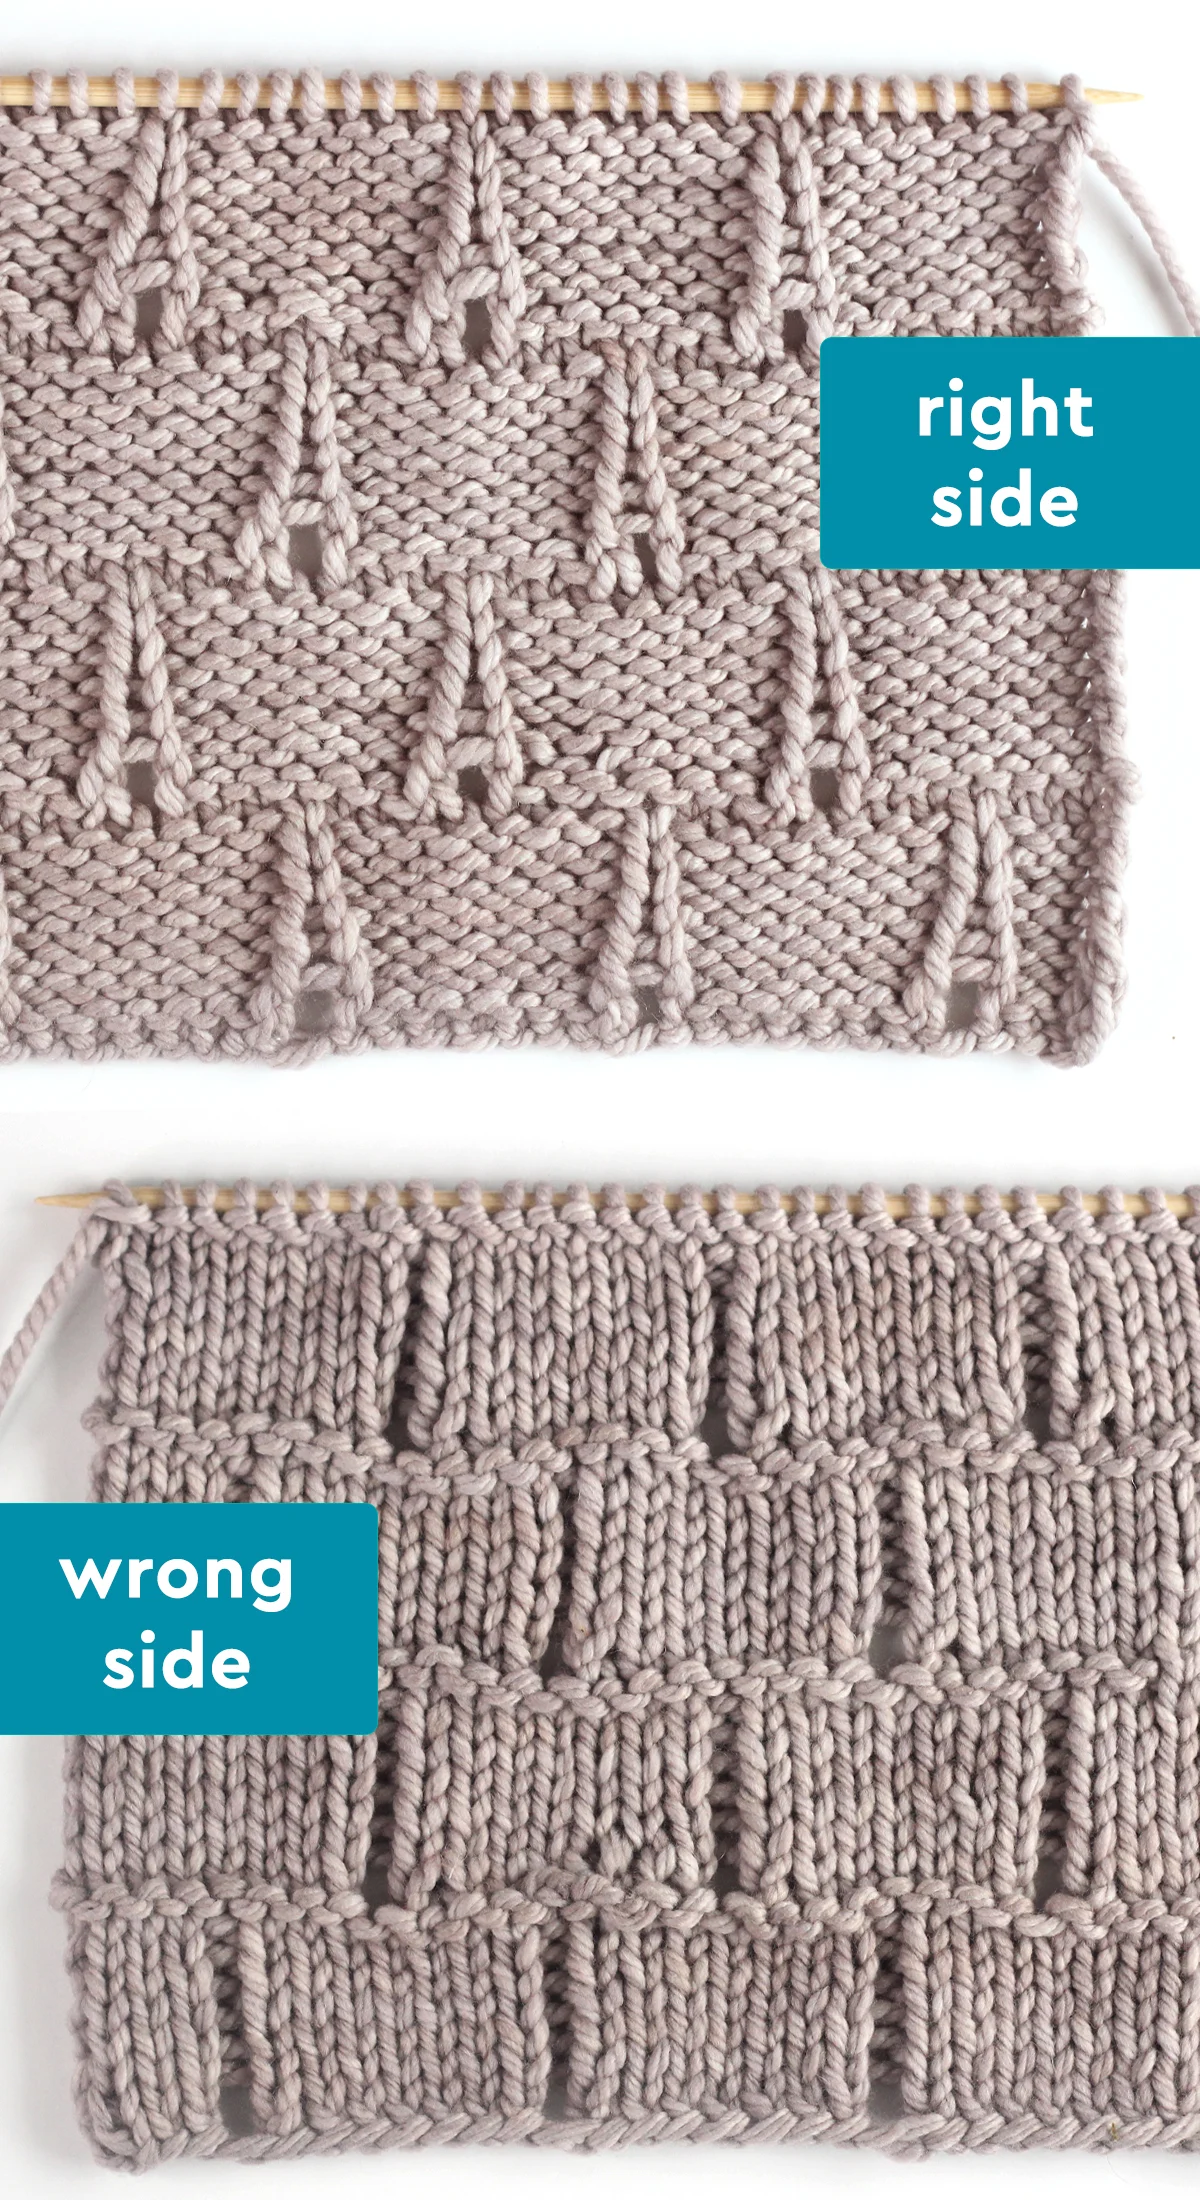 Right and wrong sides of the Eiffel Tower knit stitch pattern in gray colored yarn.